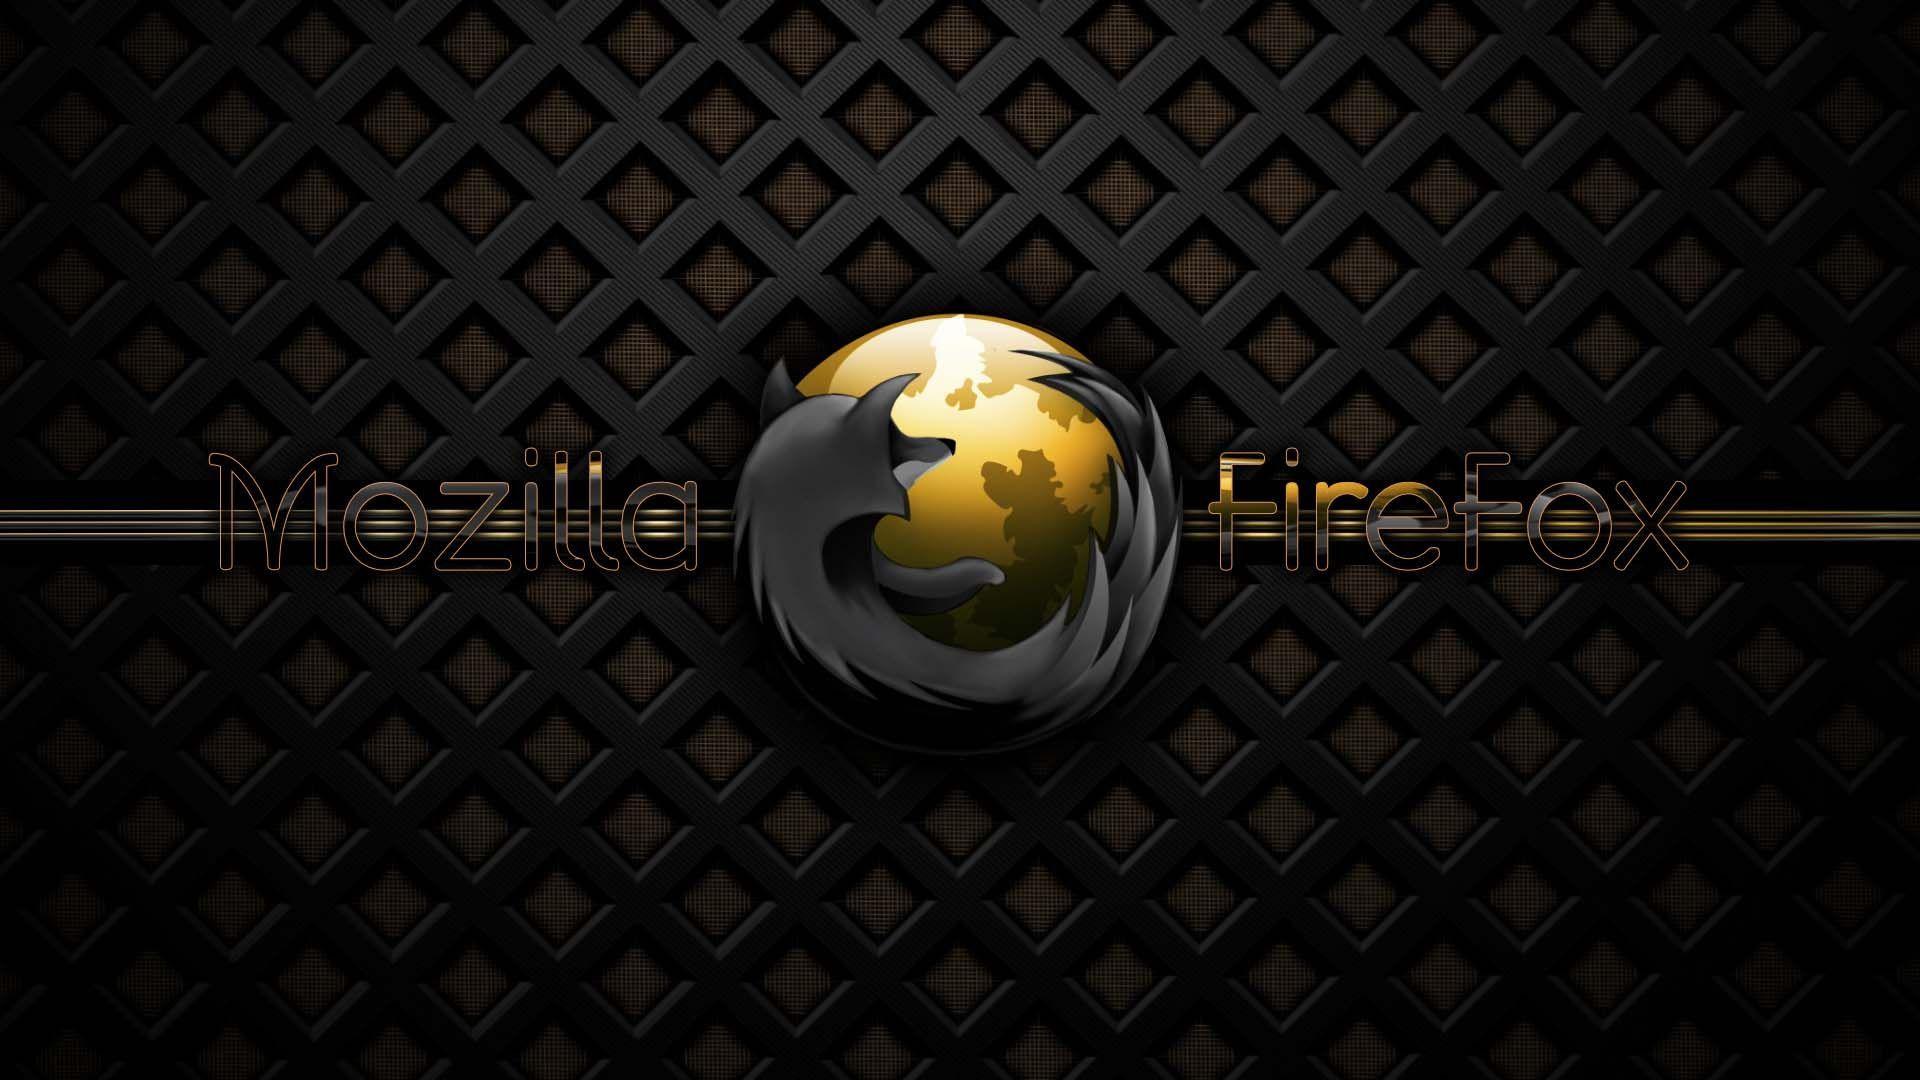 Mozilla Firefox. HD Brands and Logos Wallpaper for Mobile and Desktop